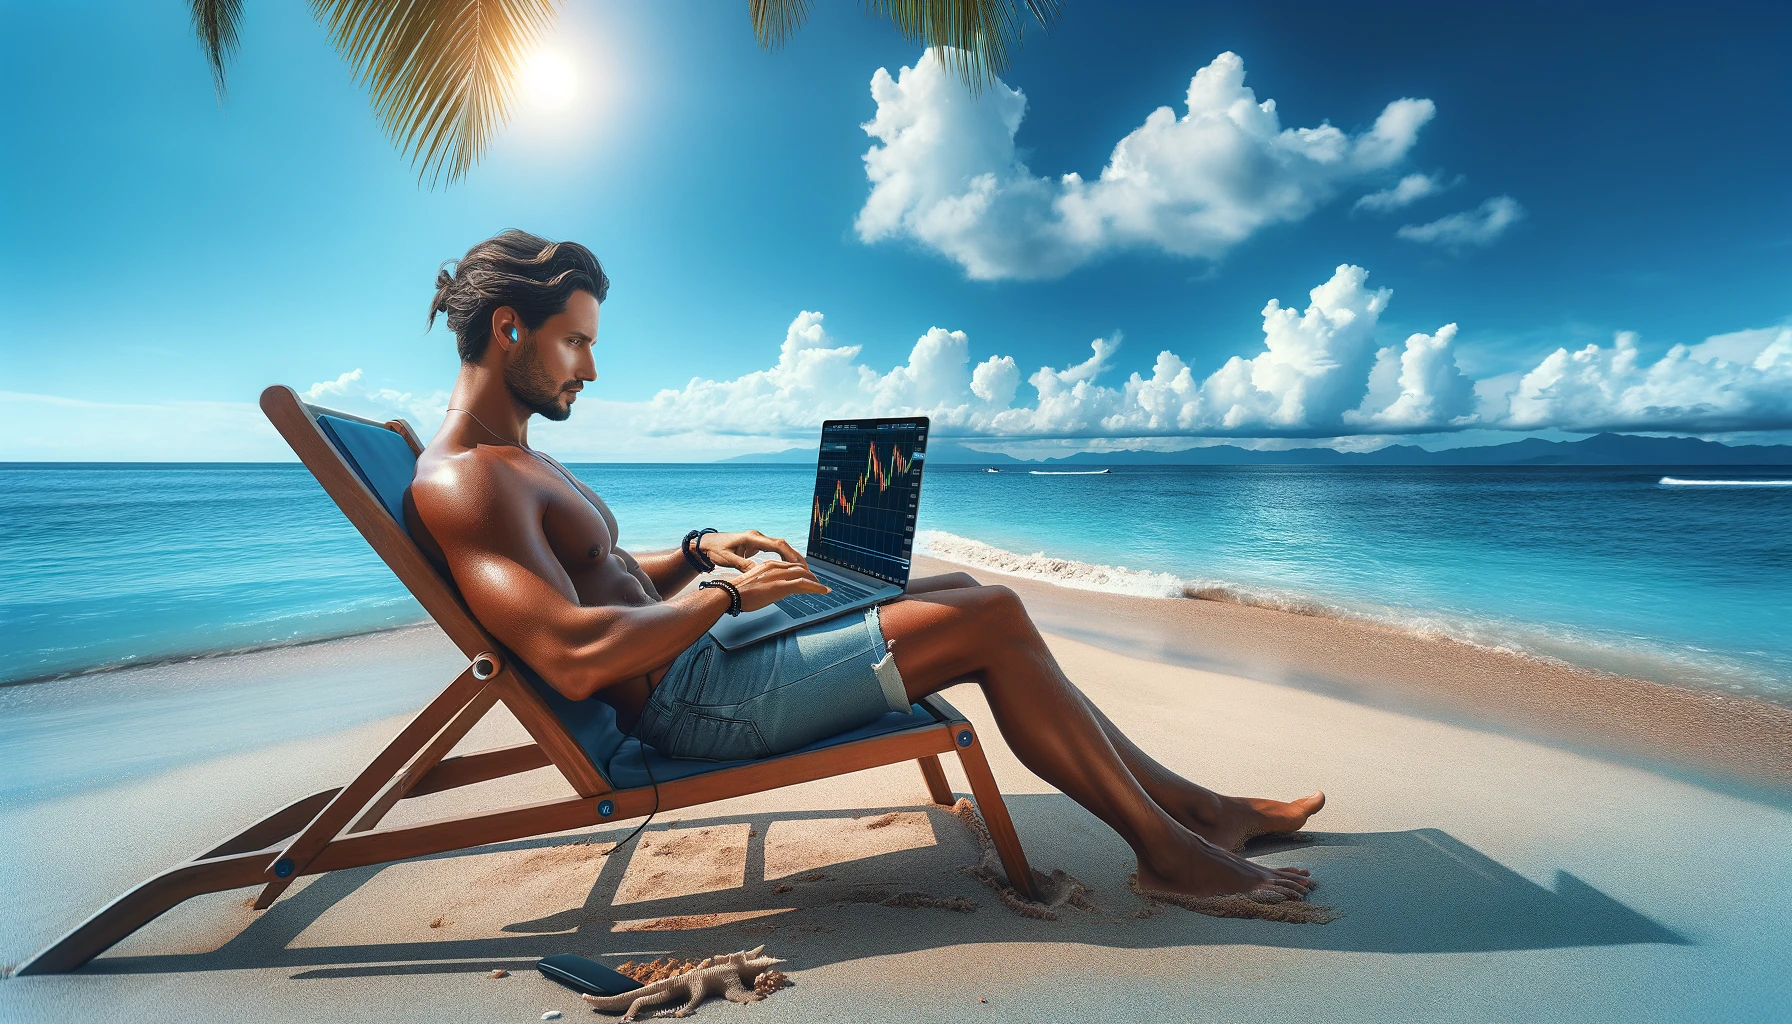 Man resting in hamock chair on a beach with a laptop open